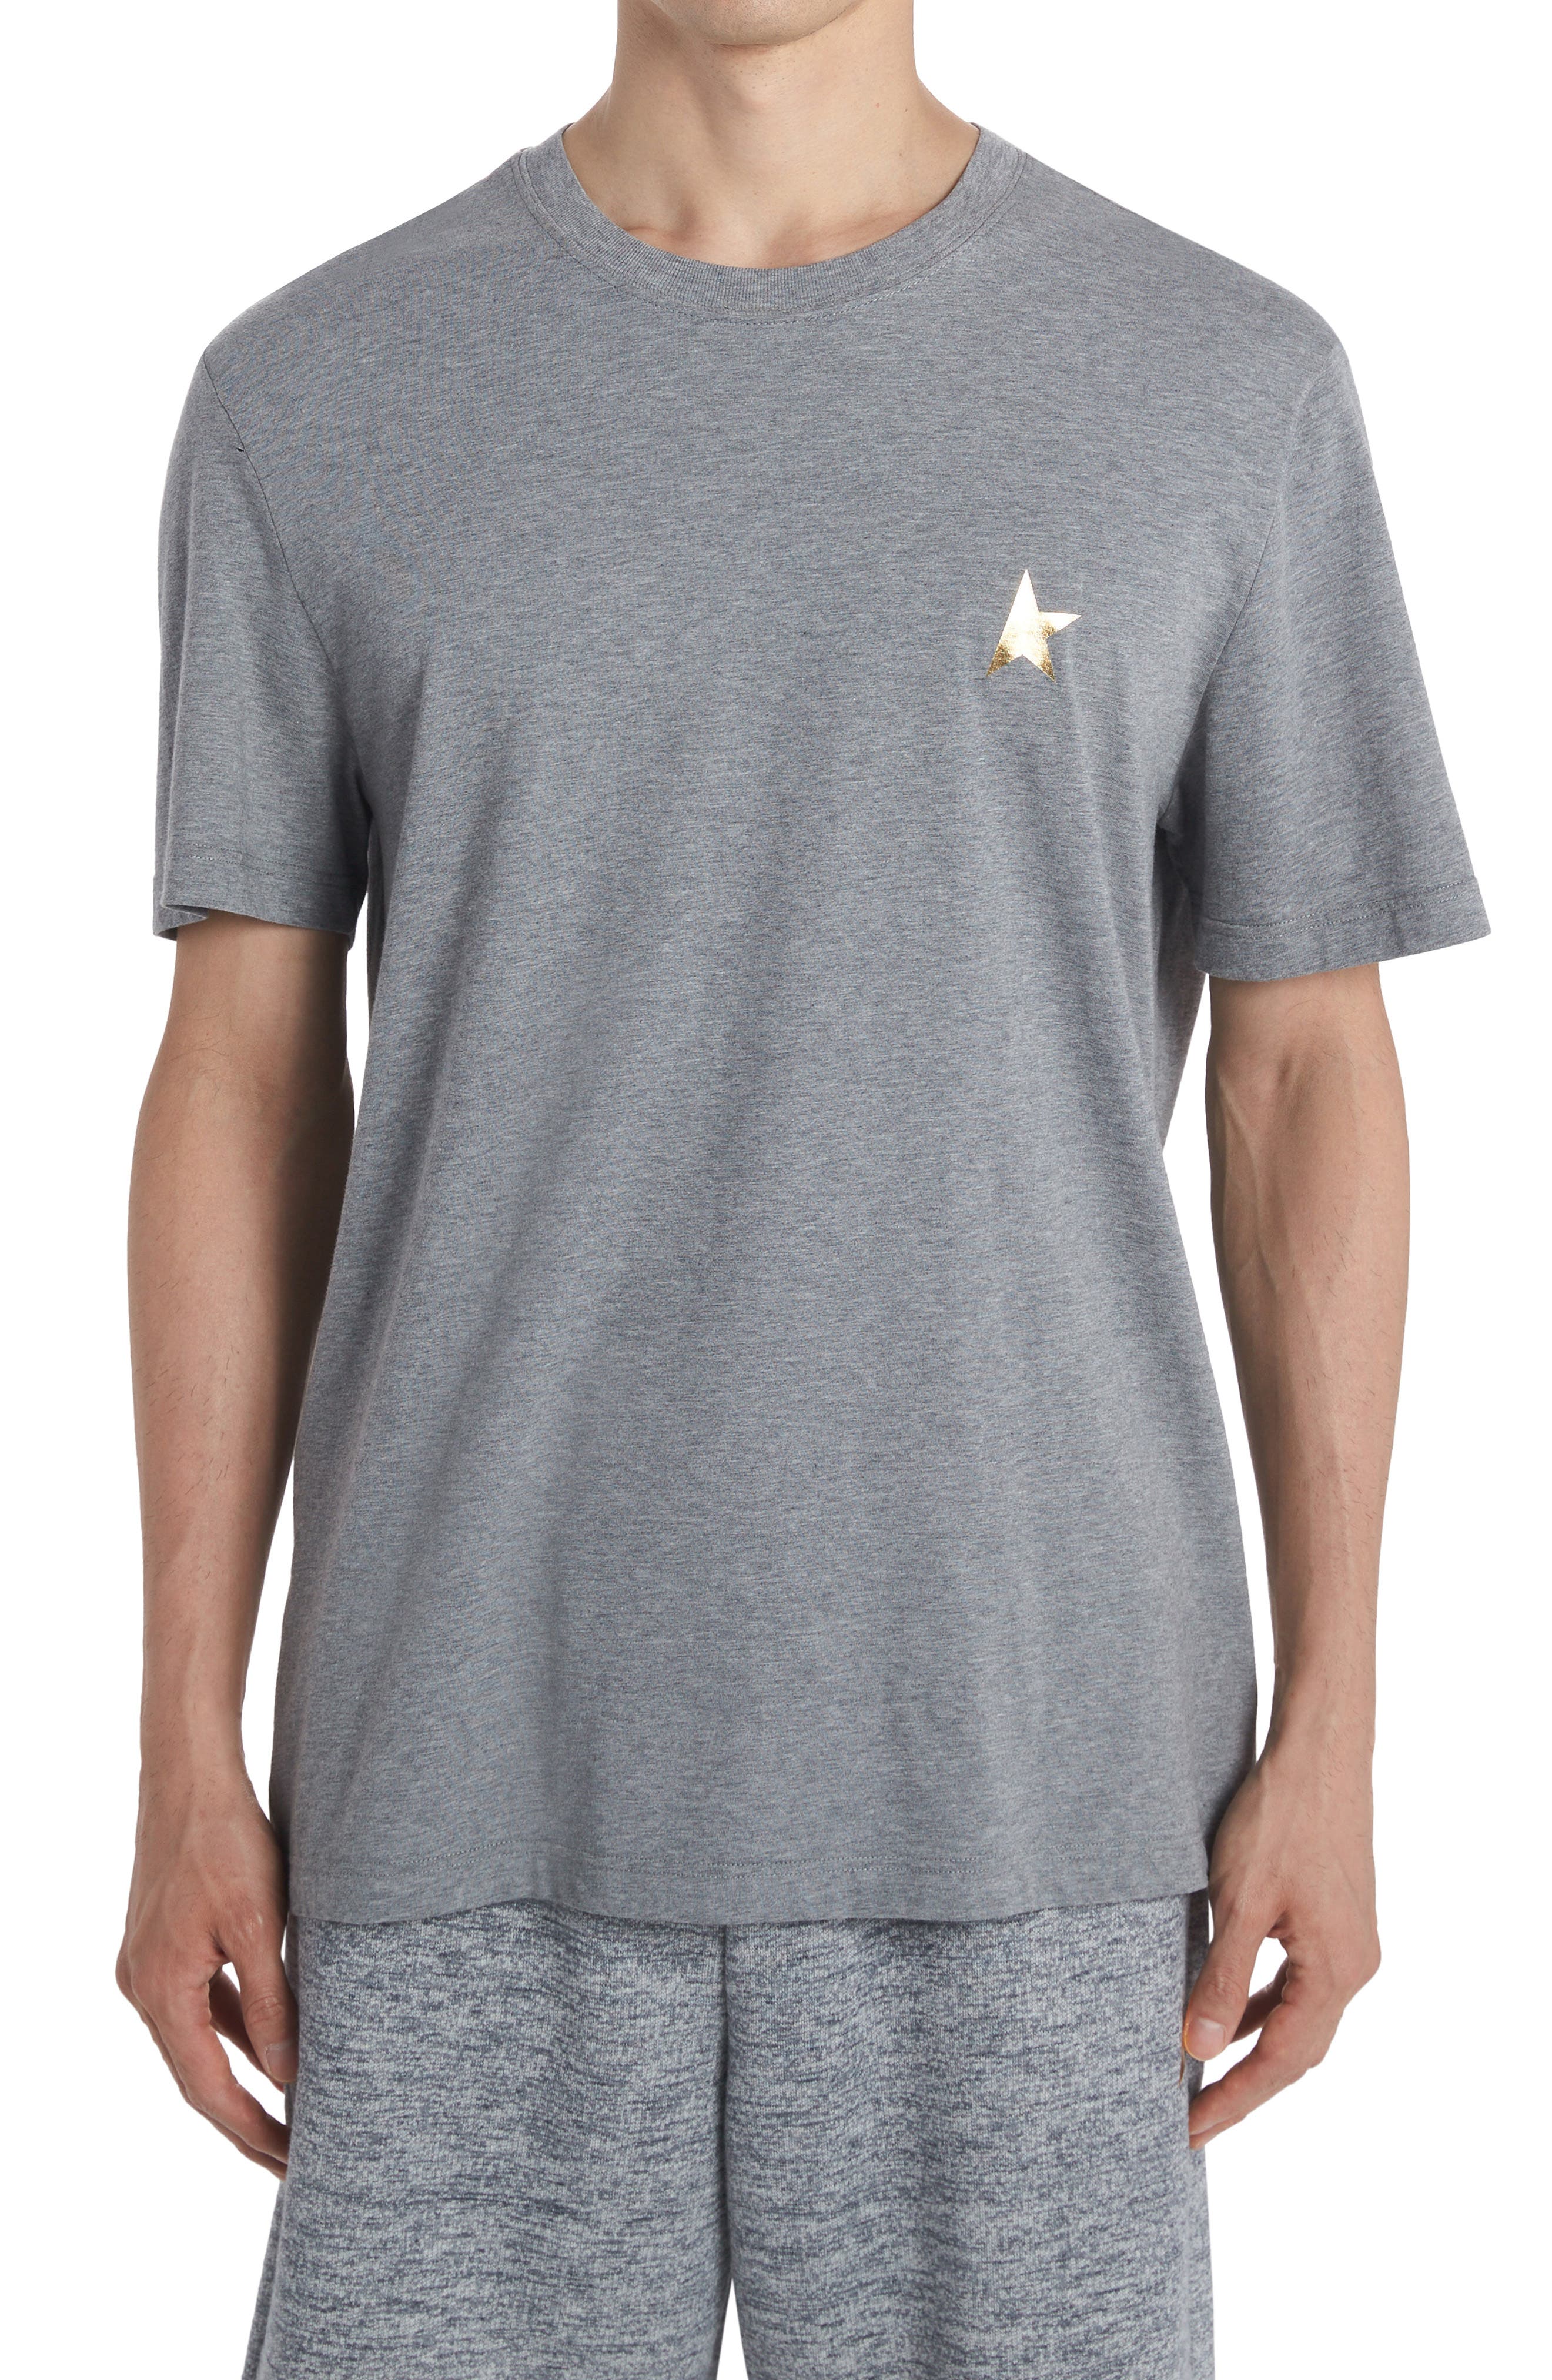 Golden Goose Star Logo Cotton Tee in Grey/Gold at Nordstrom, Size Xx-Large